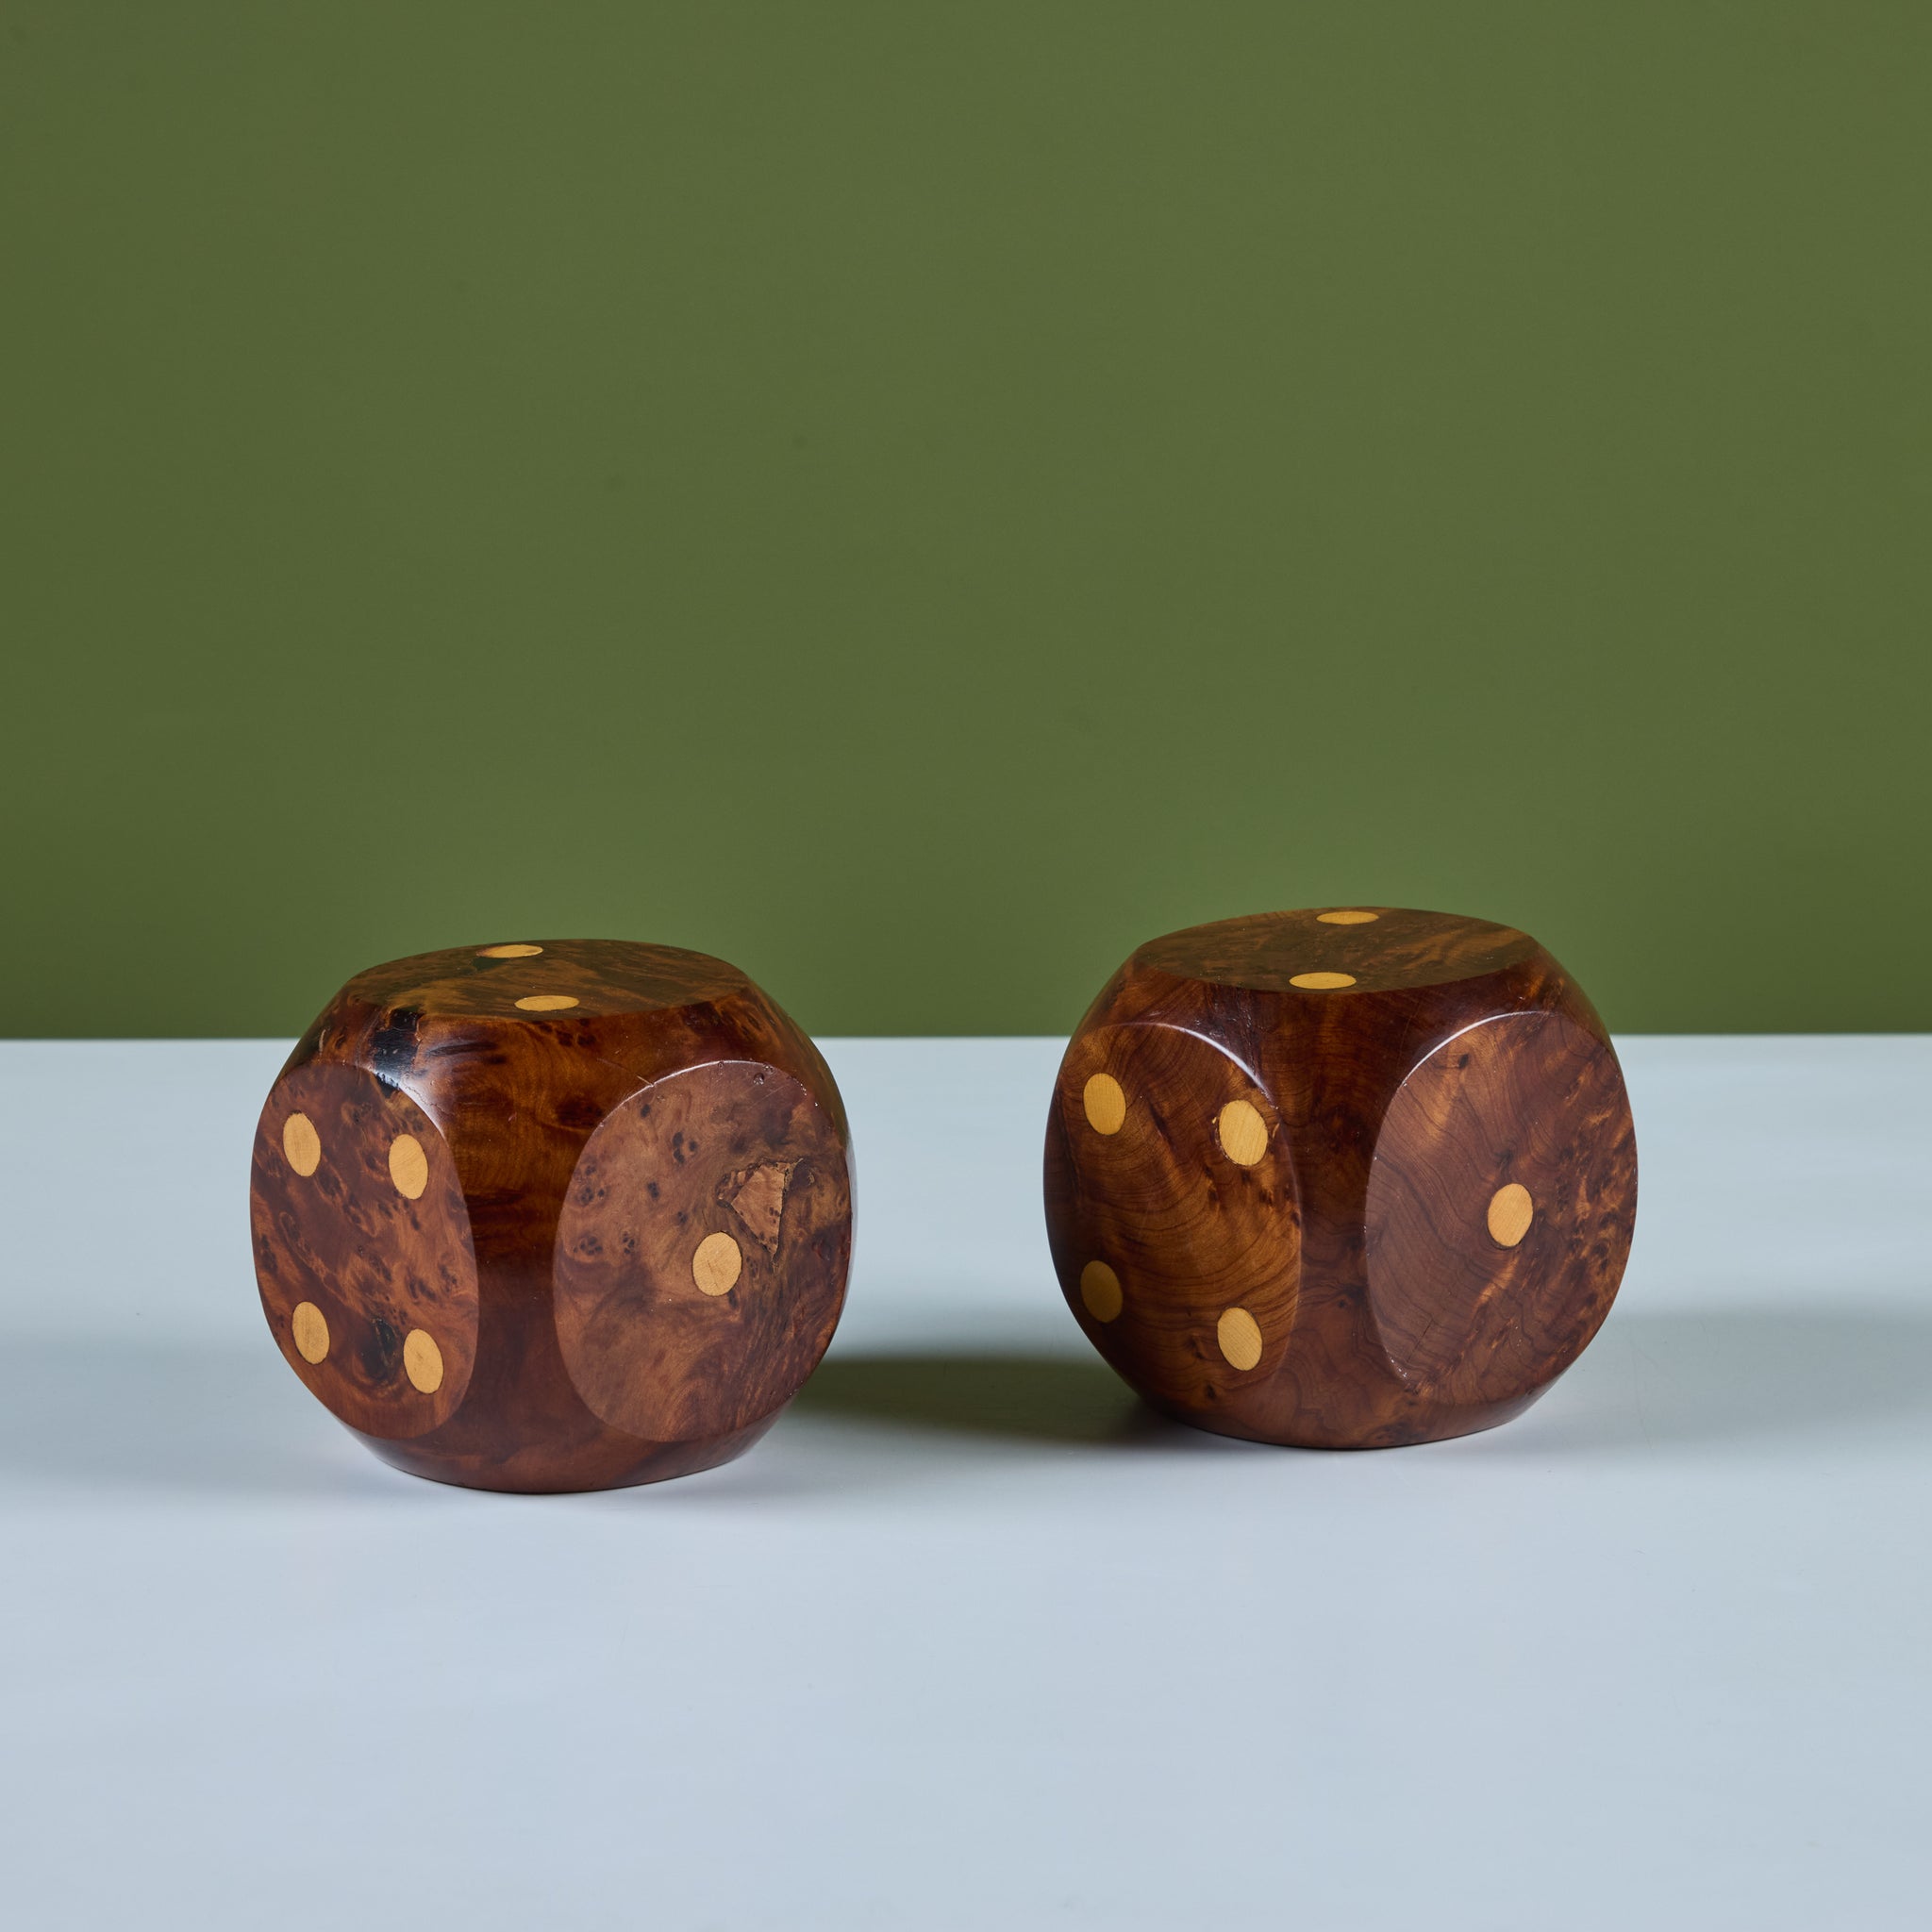 Pair of Wooden Dice